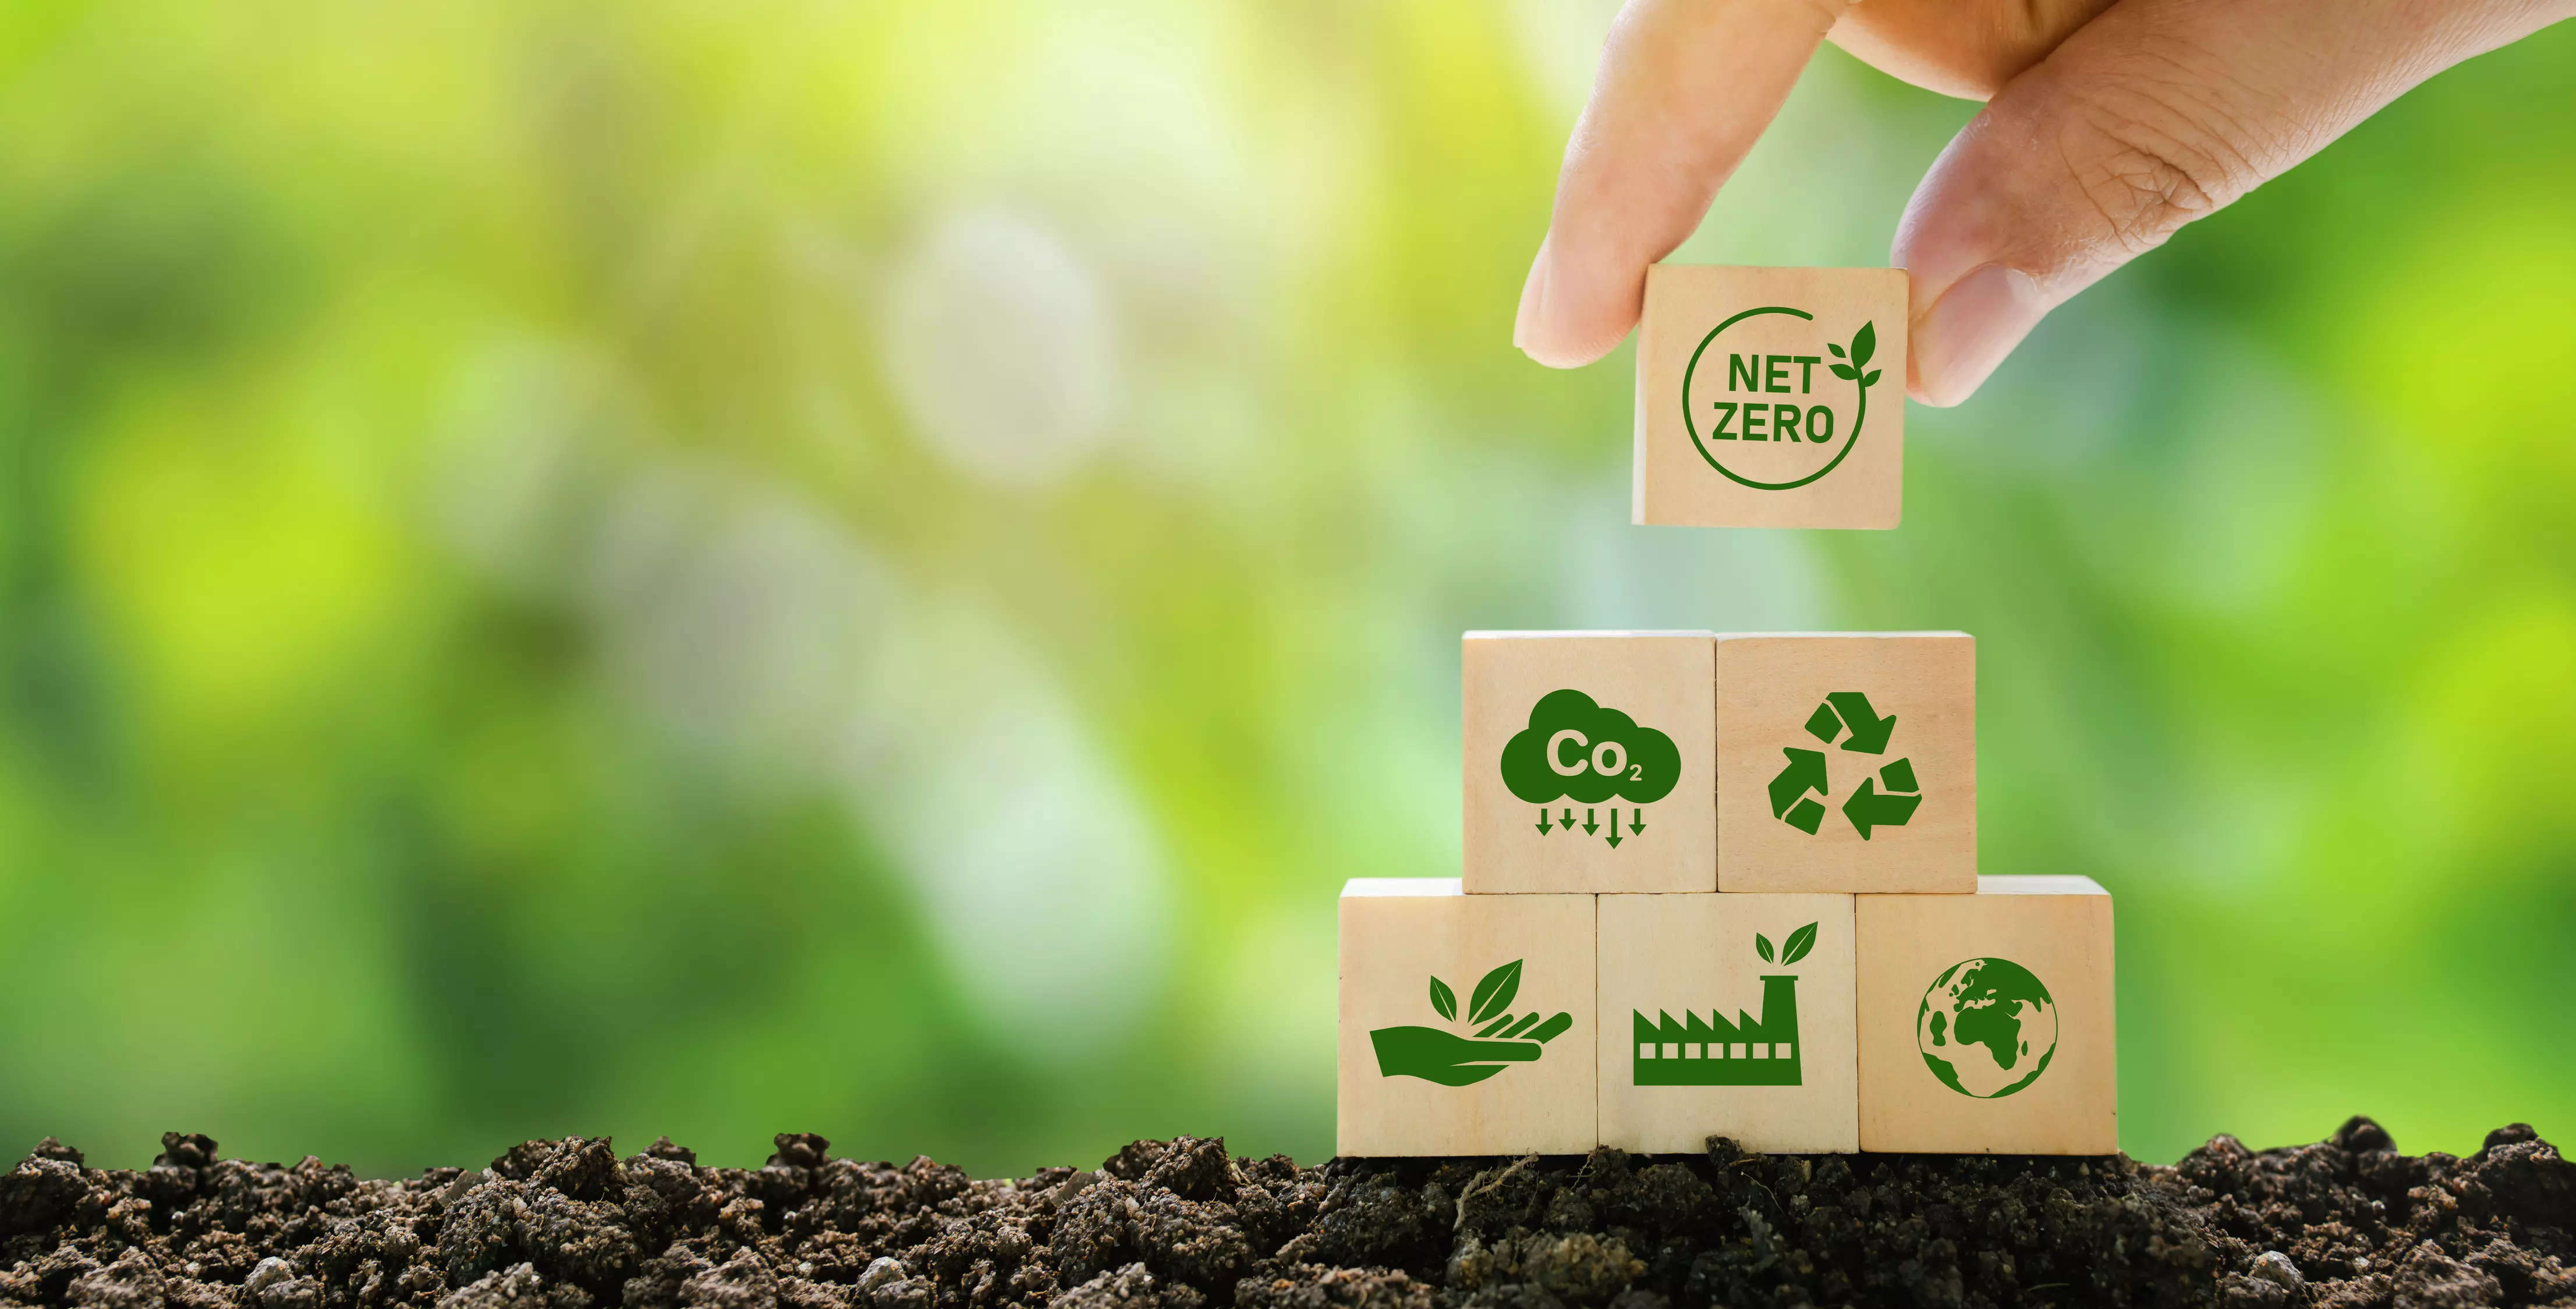 5 sustainable practices to follow for an eco-friendly environment